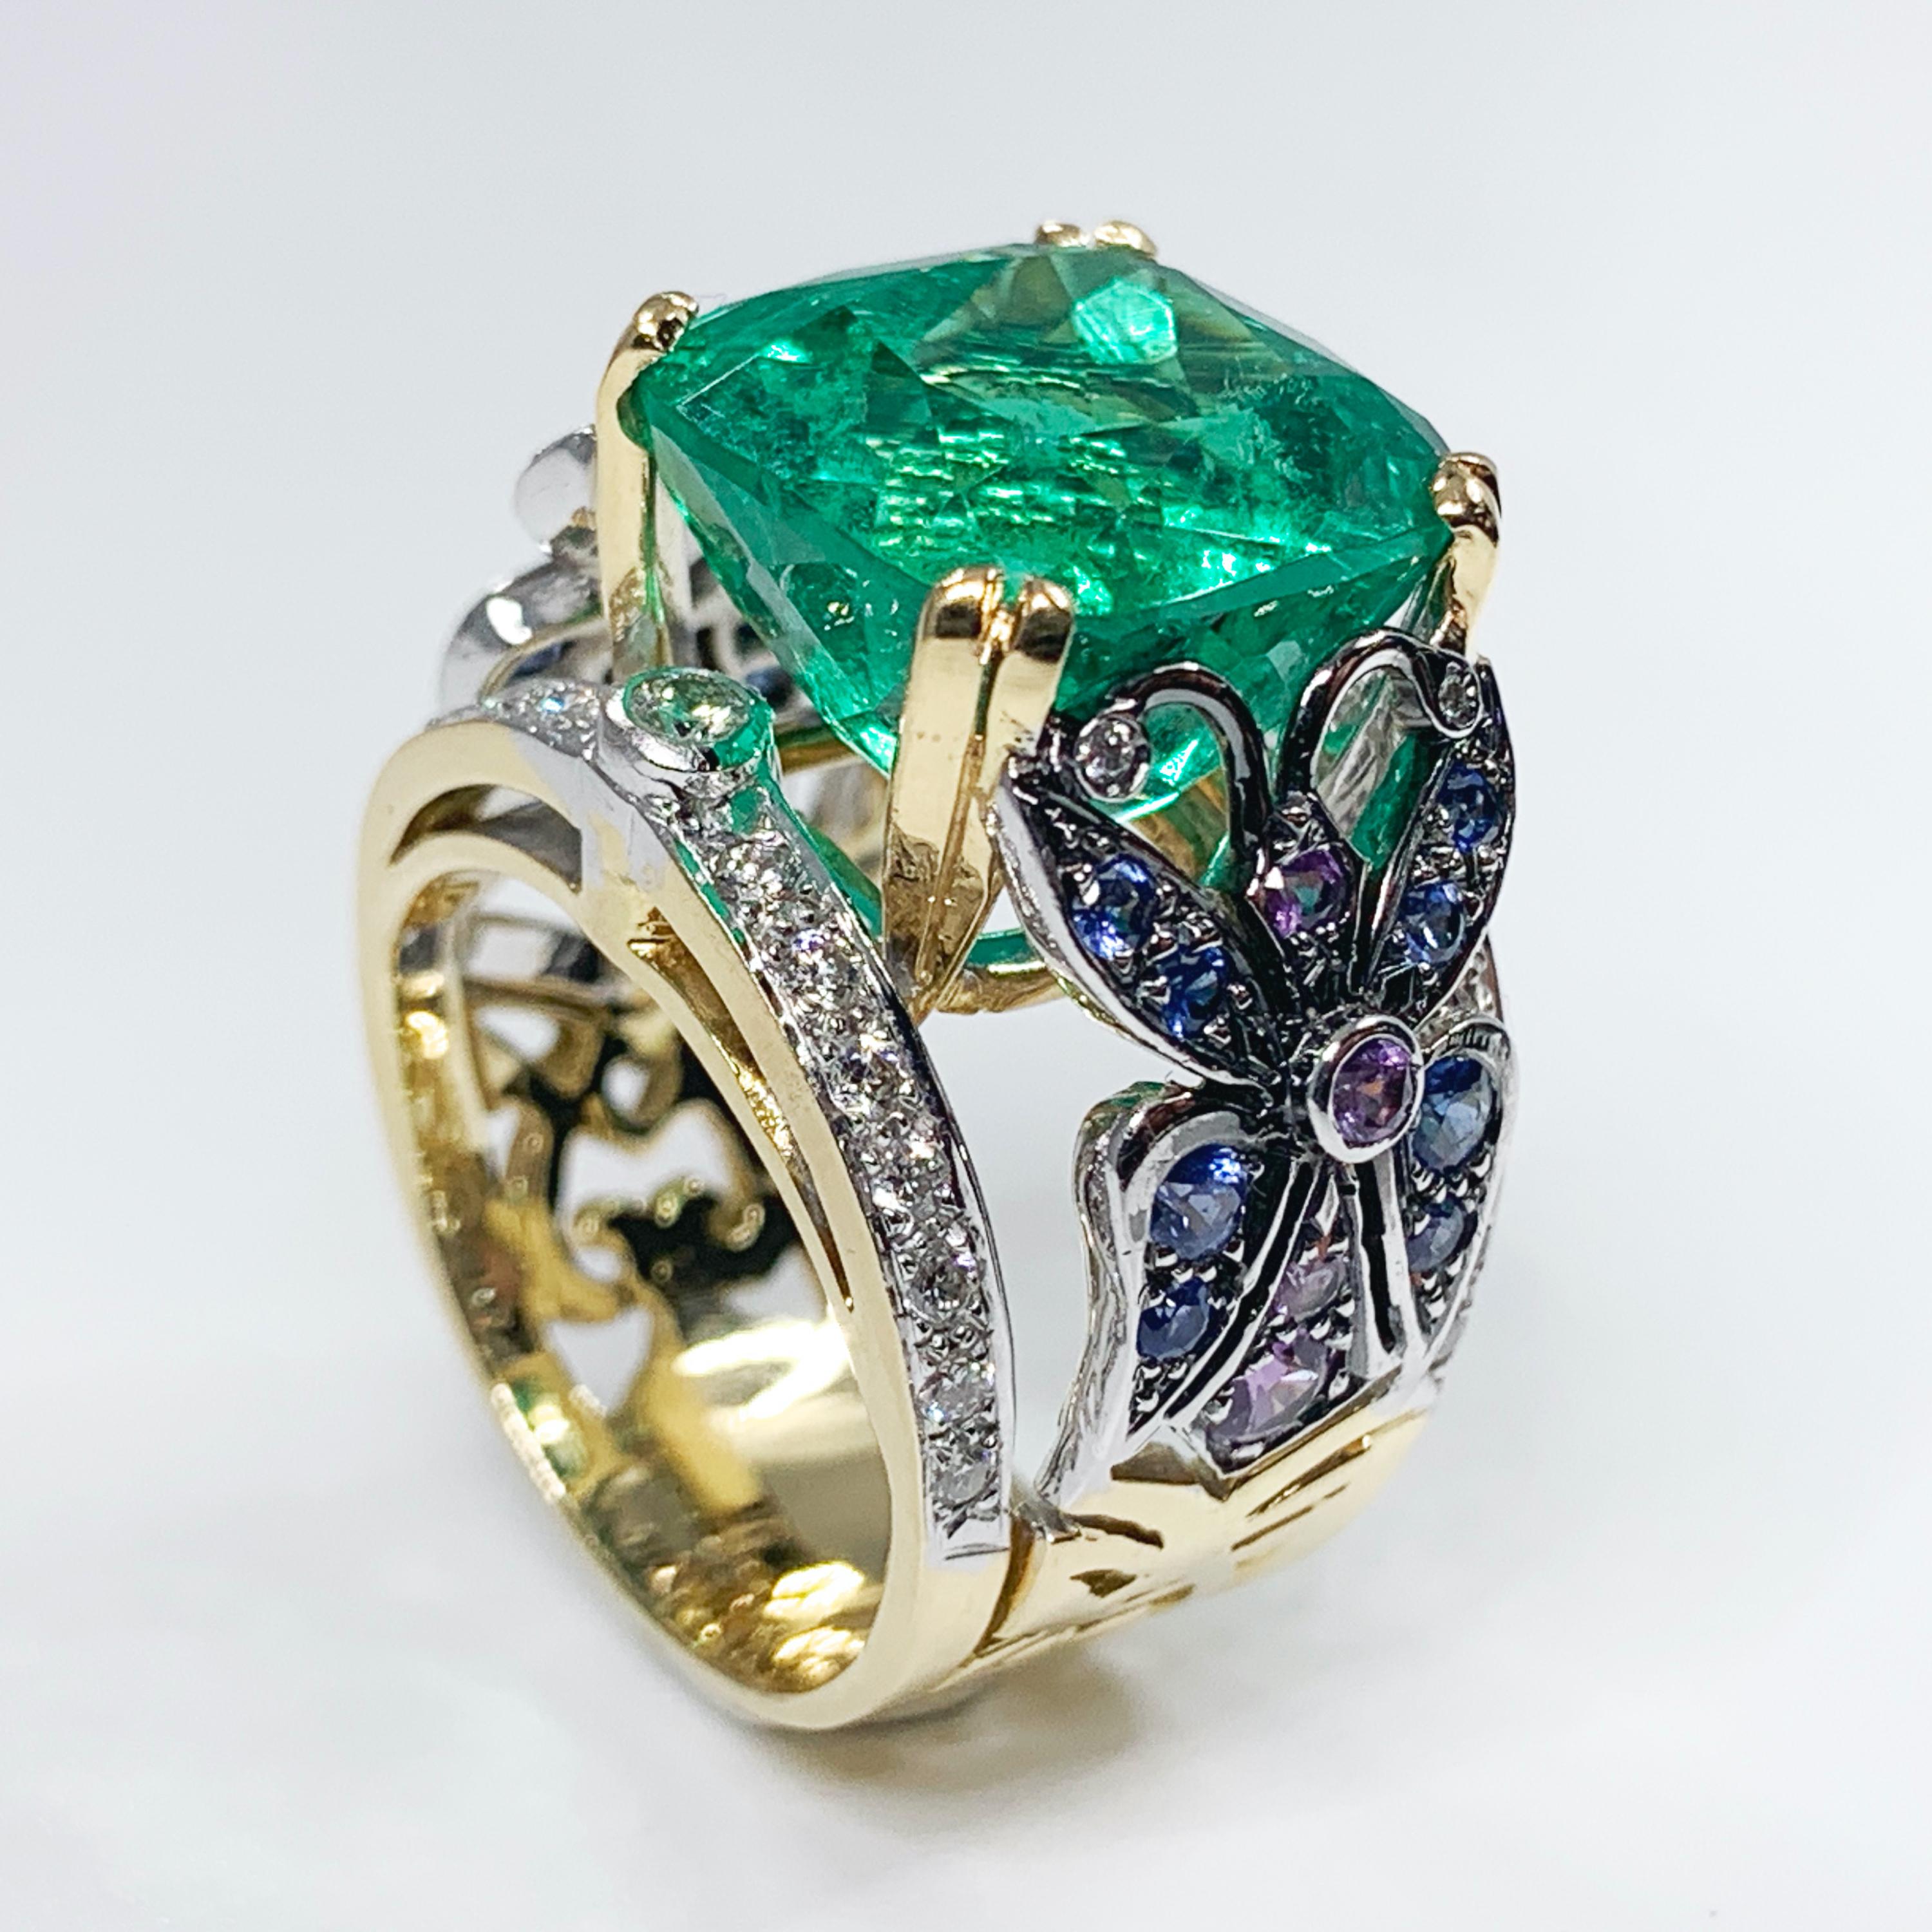 Contemporary Édéenne 11.5 Carat Colombian Emerald, Sapphires, Diamond Gold Embroidery Ring For Sale